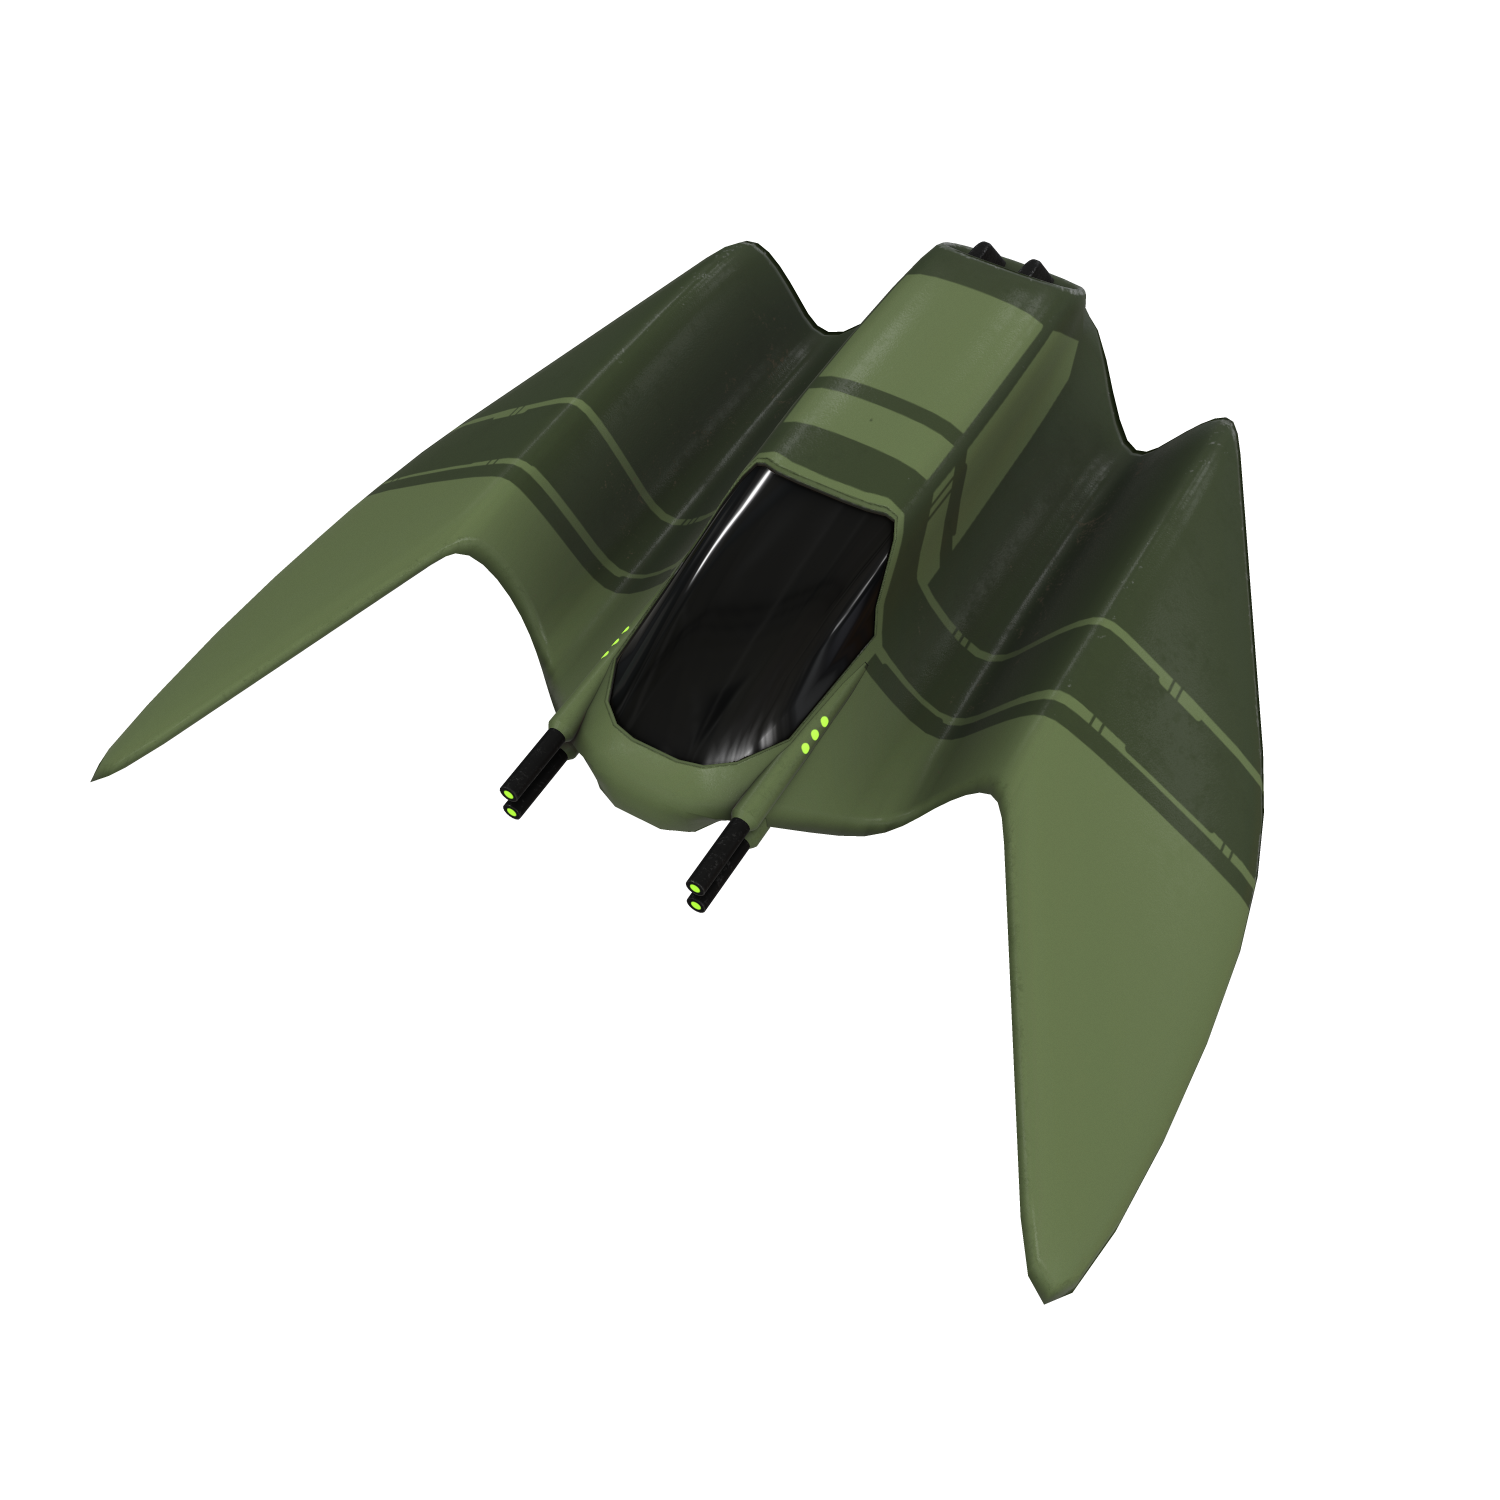 Osprey friendly spaceship from play-to-earn game Operation Dawn